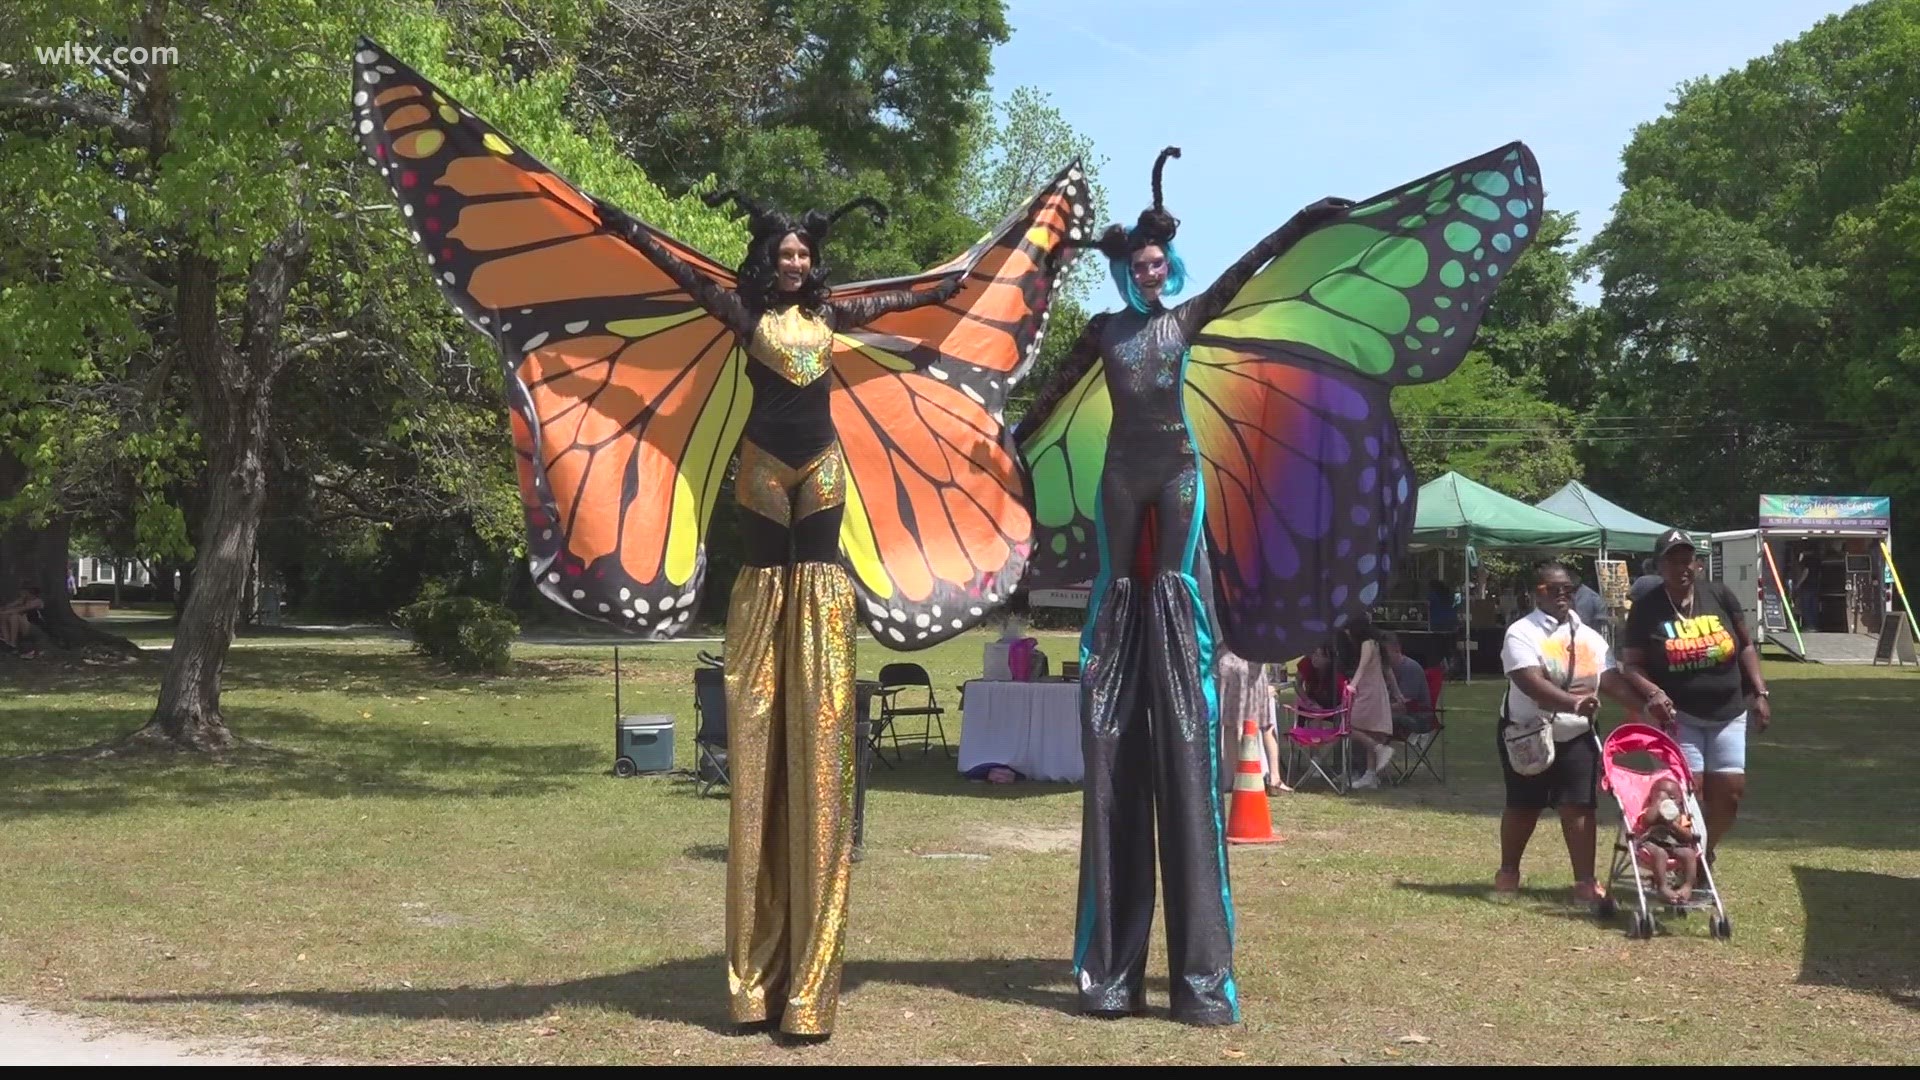 The annual event at Memorial Park raises money for the Heart of Sumter Neighborhood Association through vendor fees and beverage sales, while admission is free.